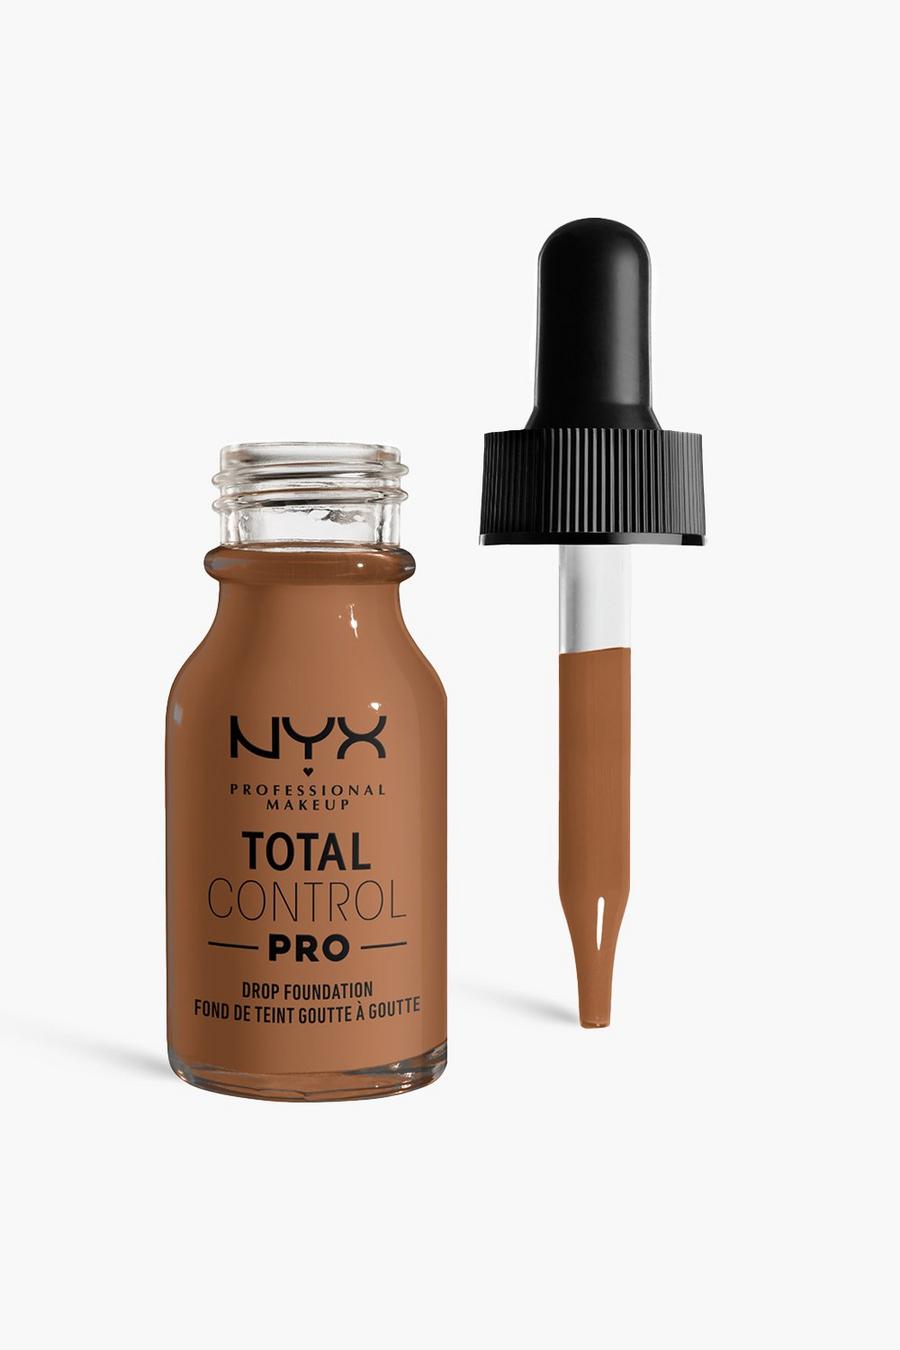 Mahogany NYX Professional Makeup Total Control Pro Drop Controllable Coverage Foundation